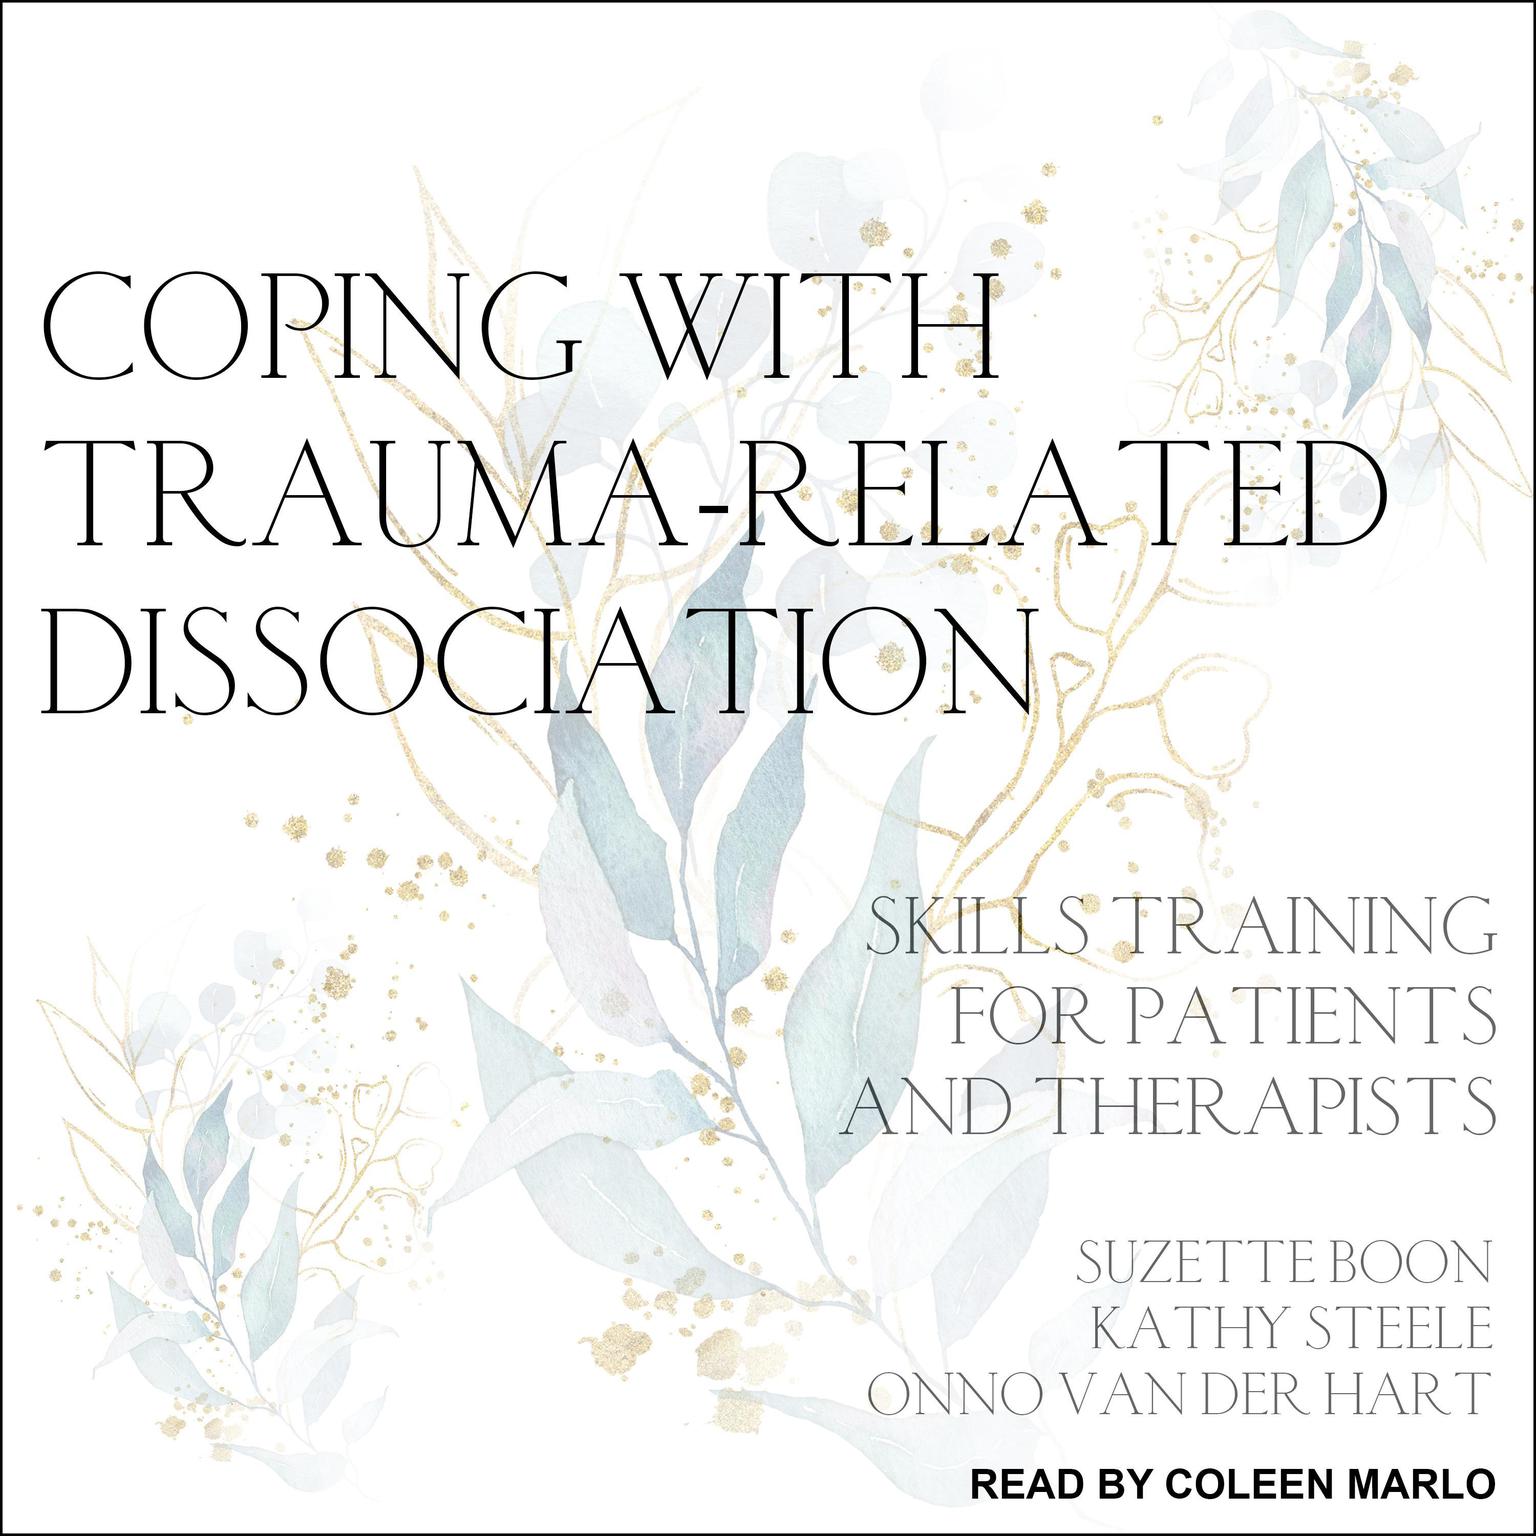 Coping with Trauma-Related Dissociation: Skills Training for Patients and Therapists Audiobook, by Suzette Boon